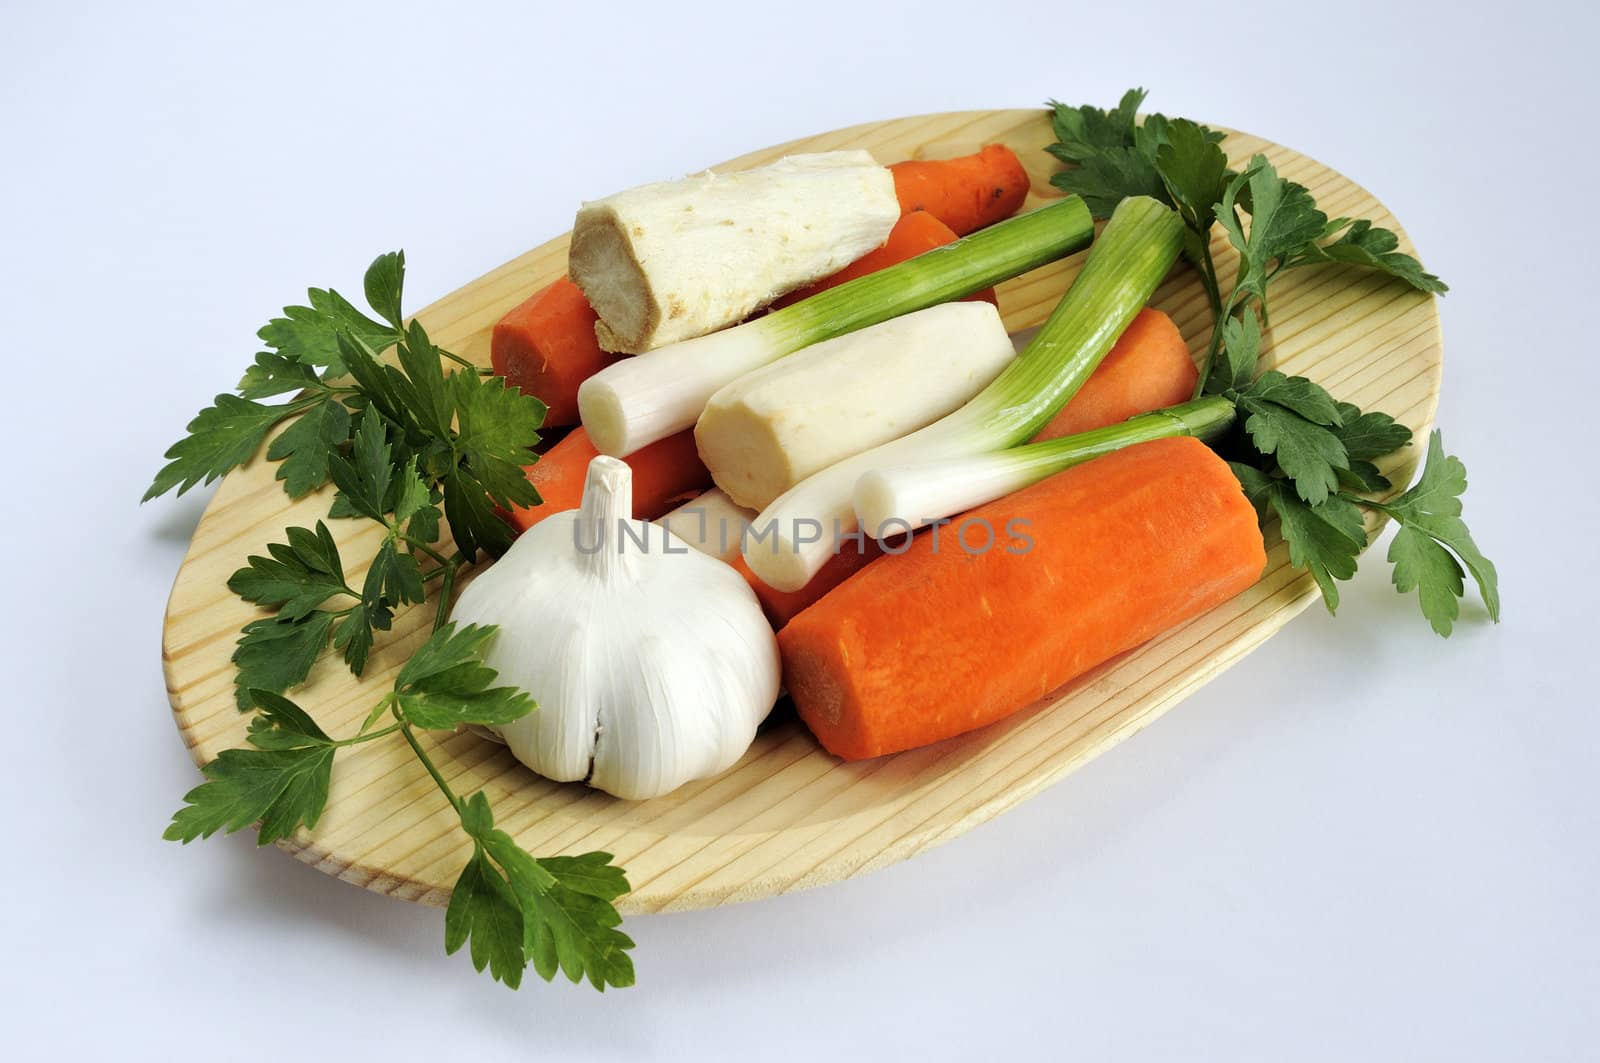 Assorted vegetables on a wooden plate 